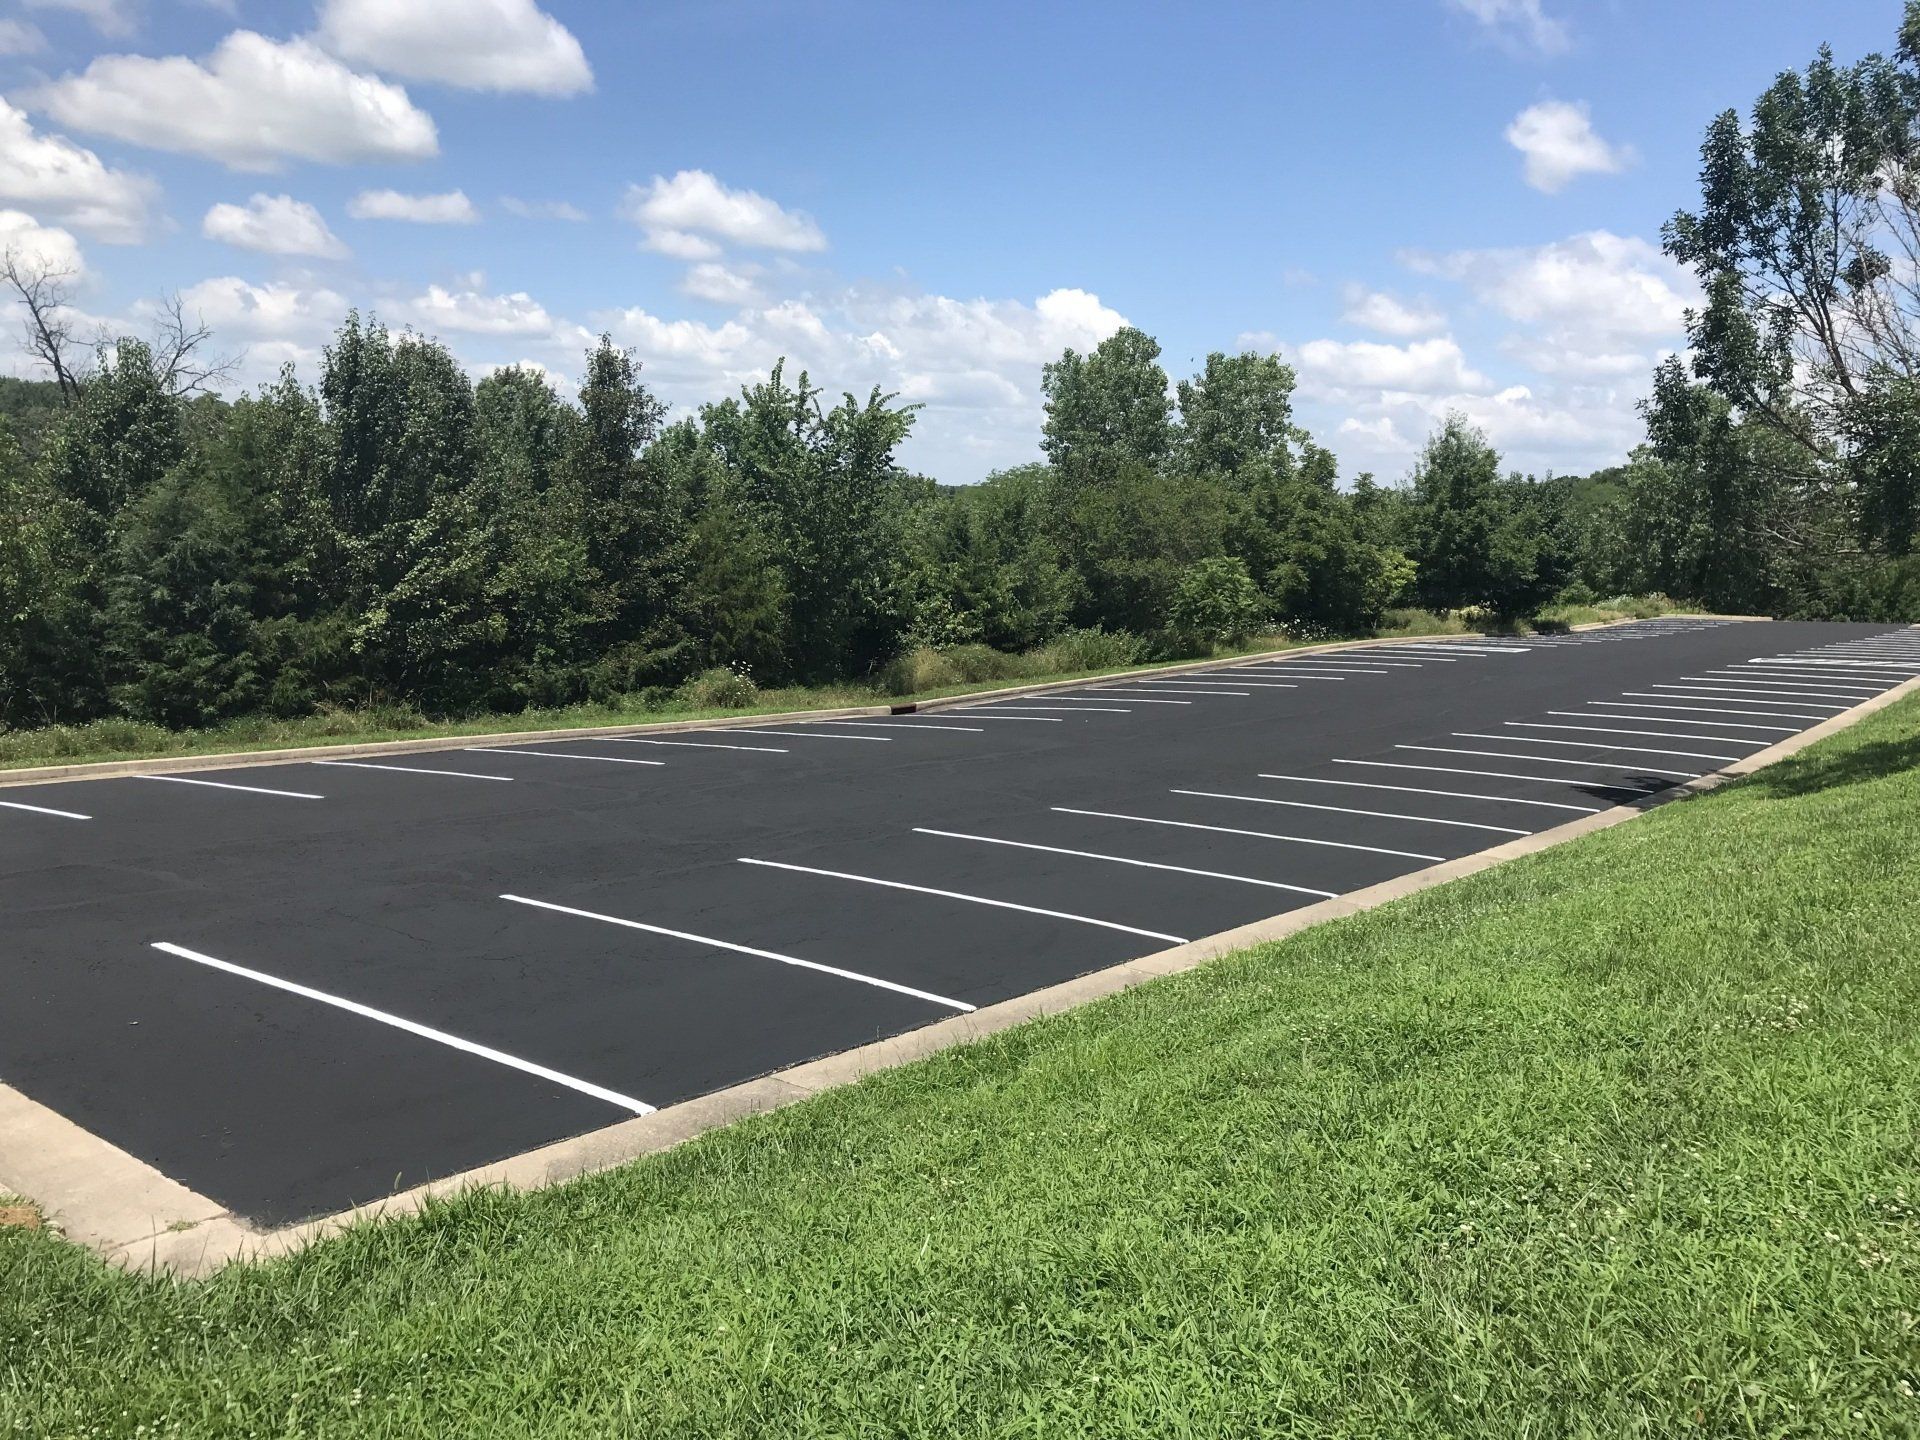 n mid-Missouri, MoSEAL is the best choice for public works projects.